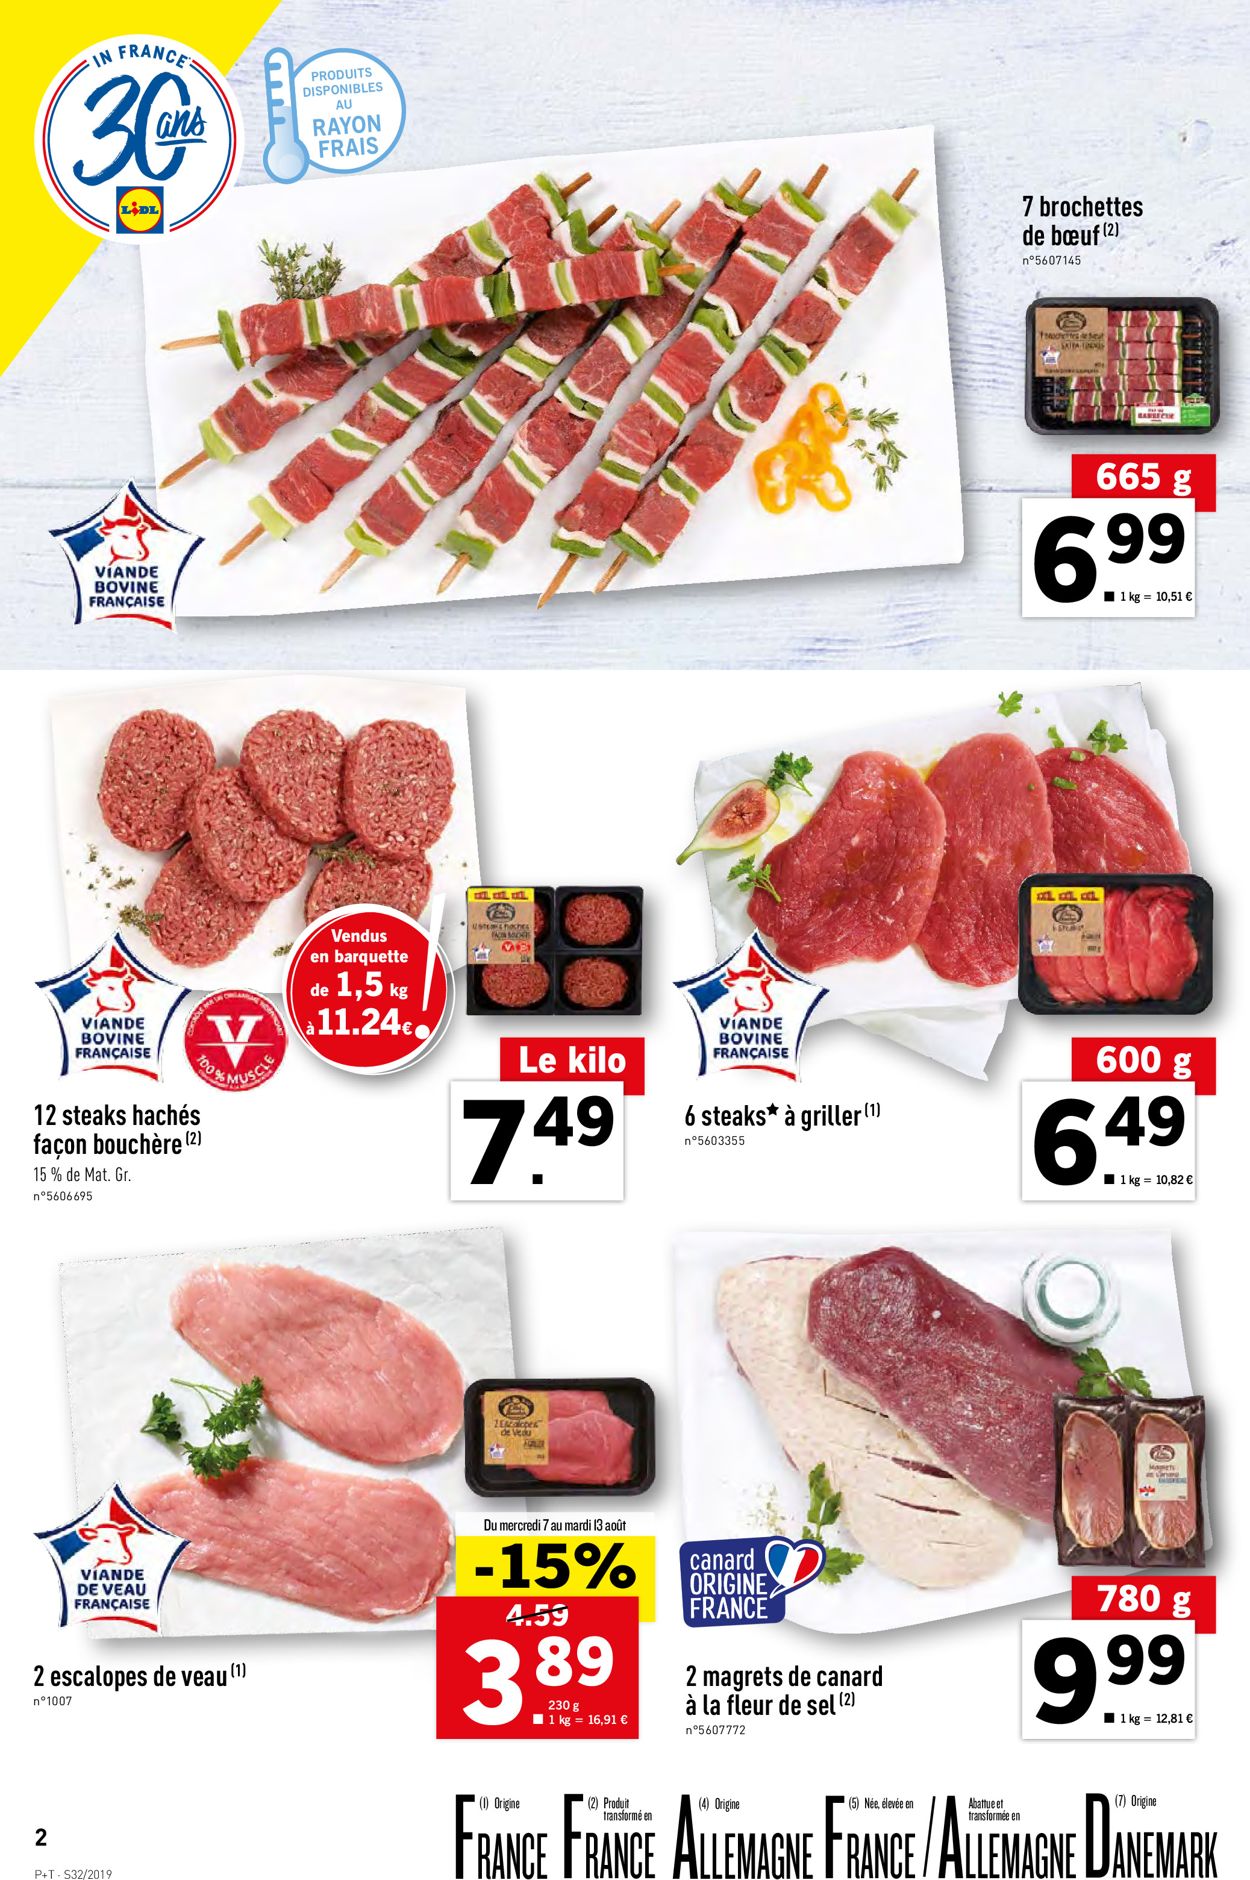 Lidl Catalogue - 07.08-13.08.2019 (Page 2)